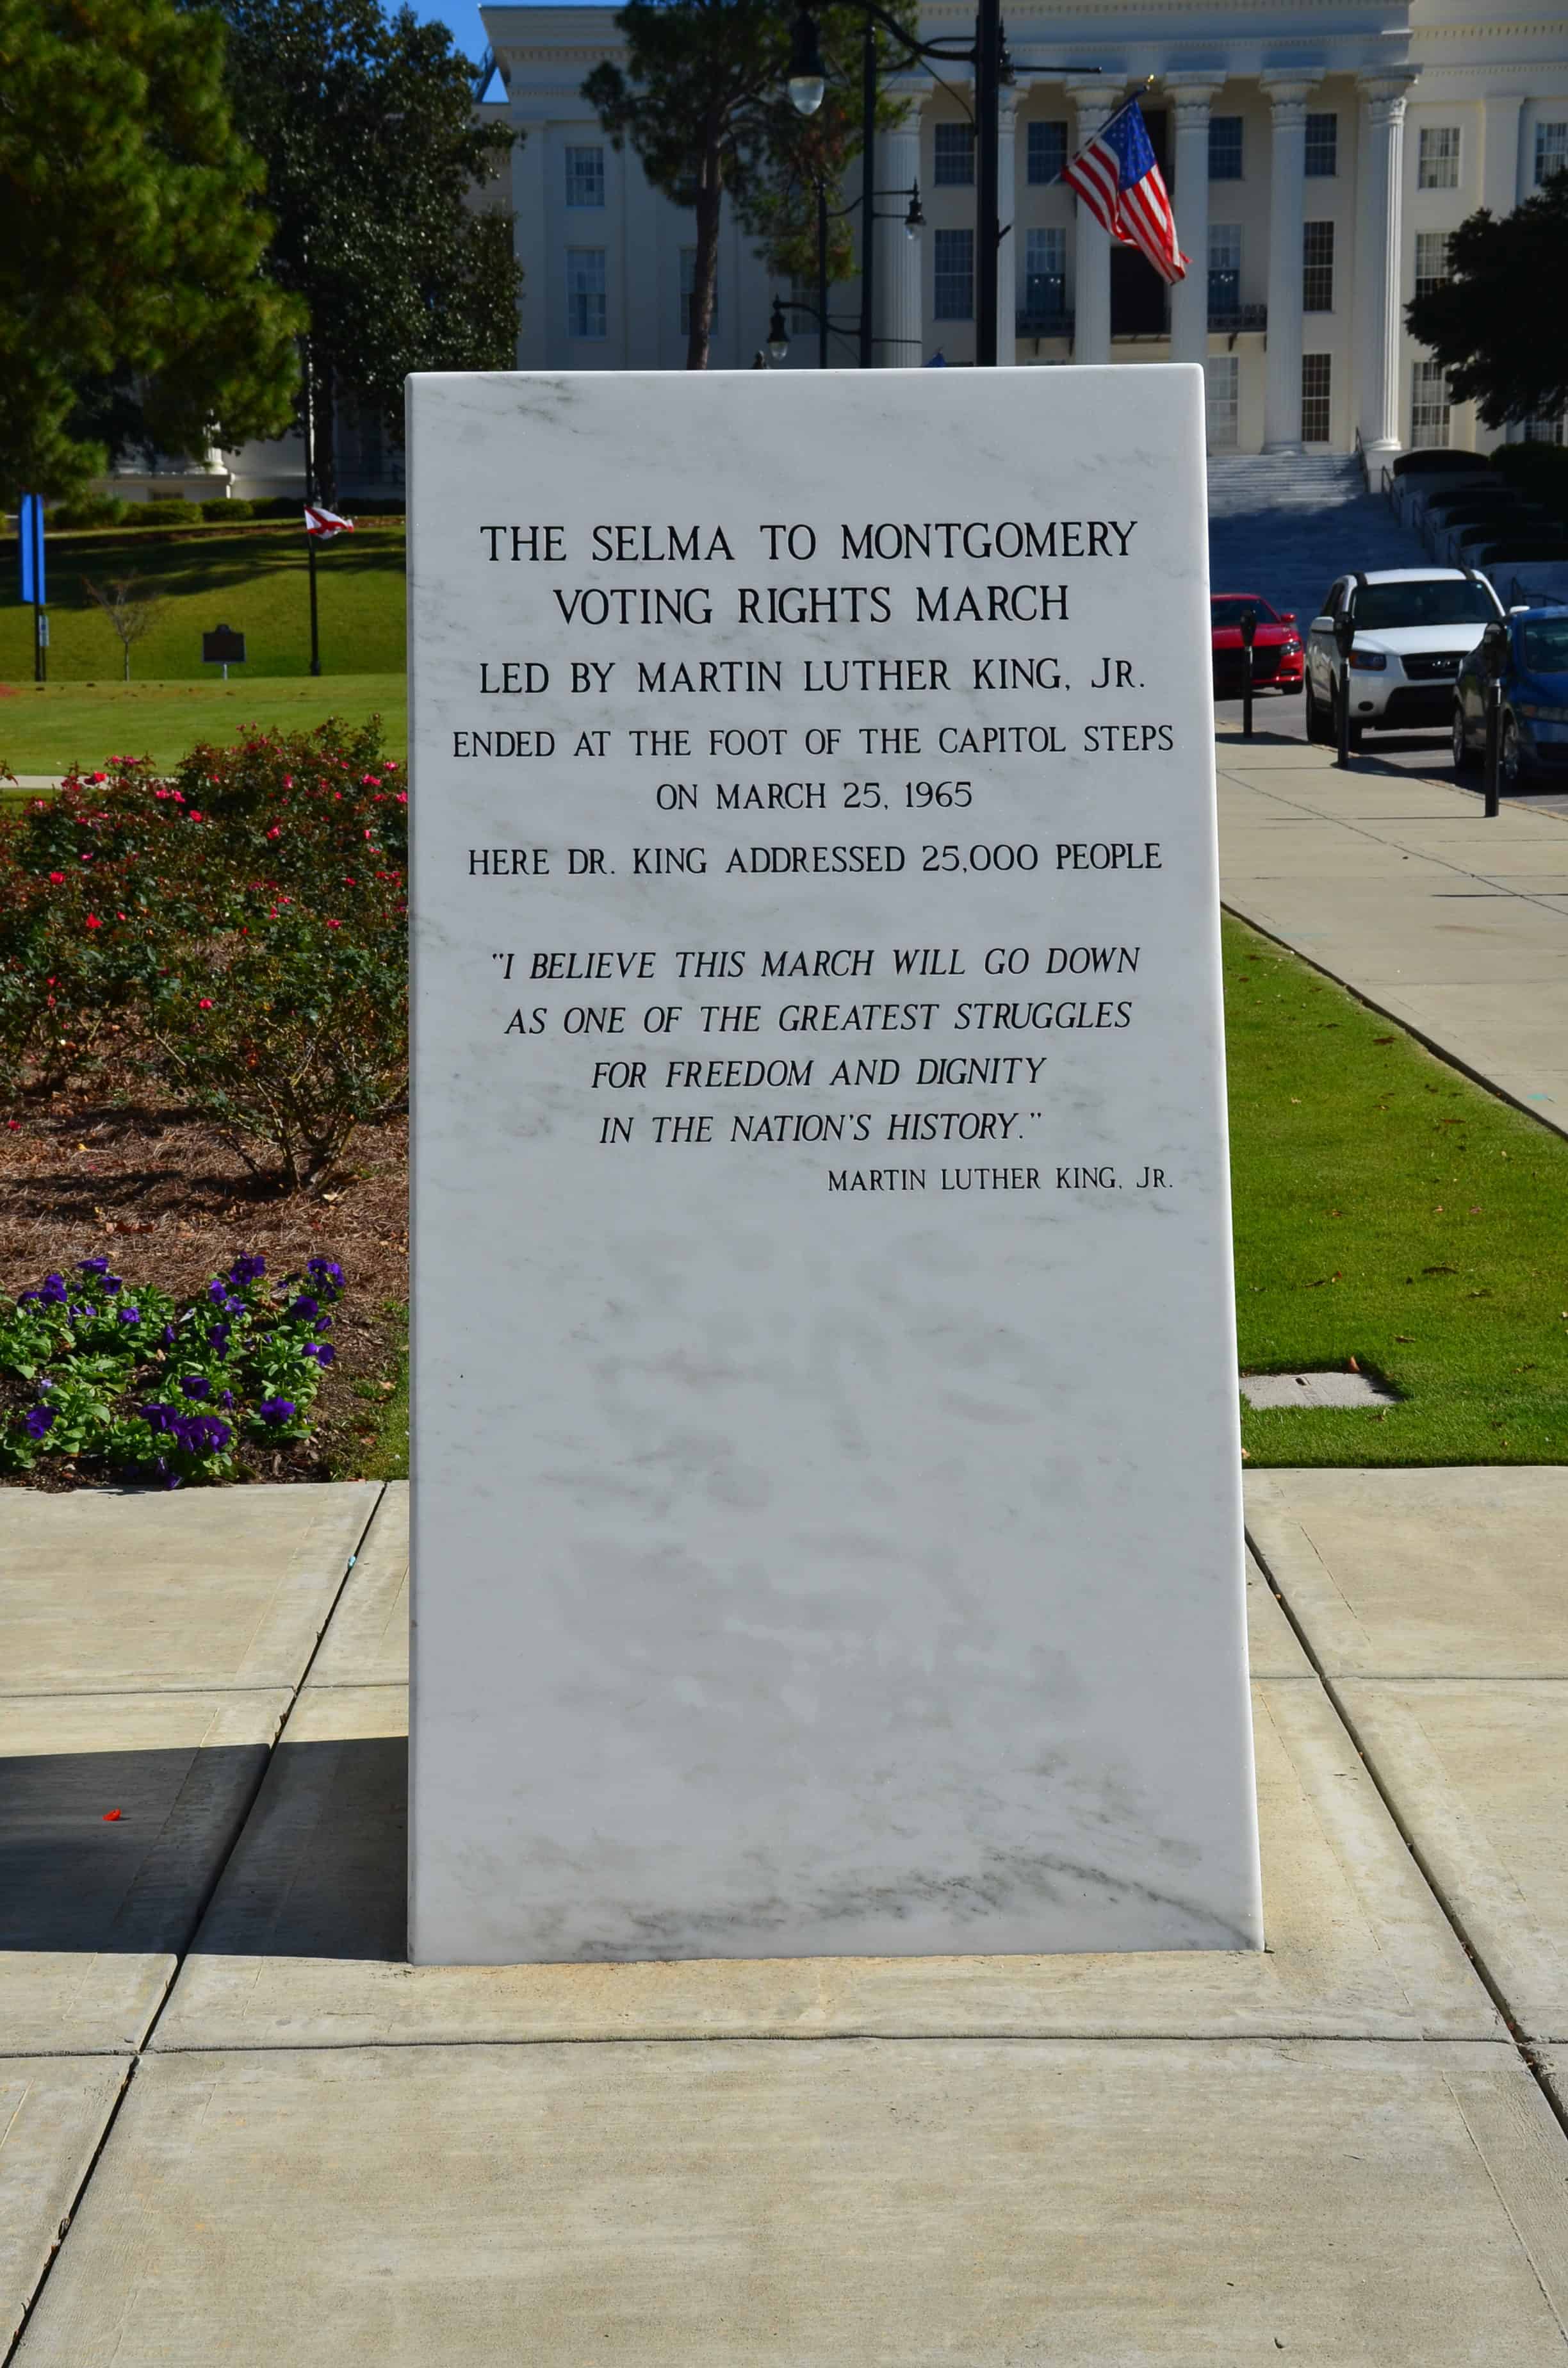 Voting Rights March monument in Montgomery, Alabama